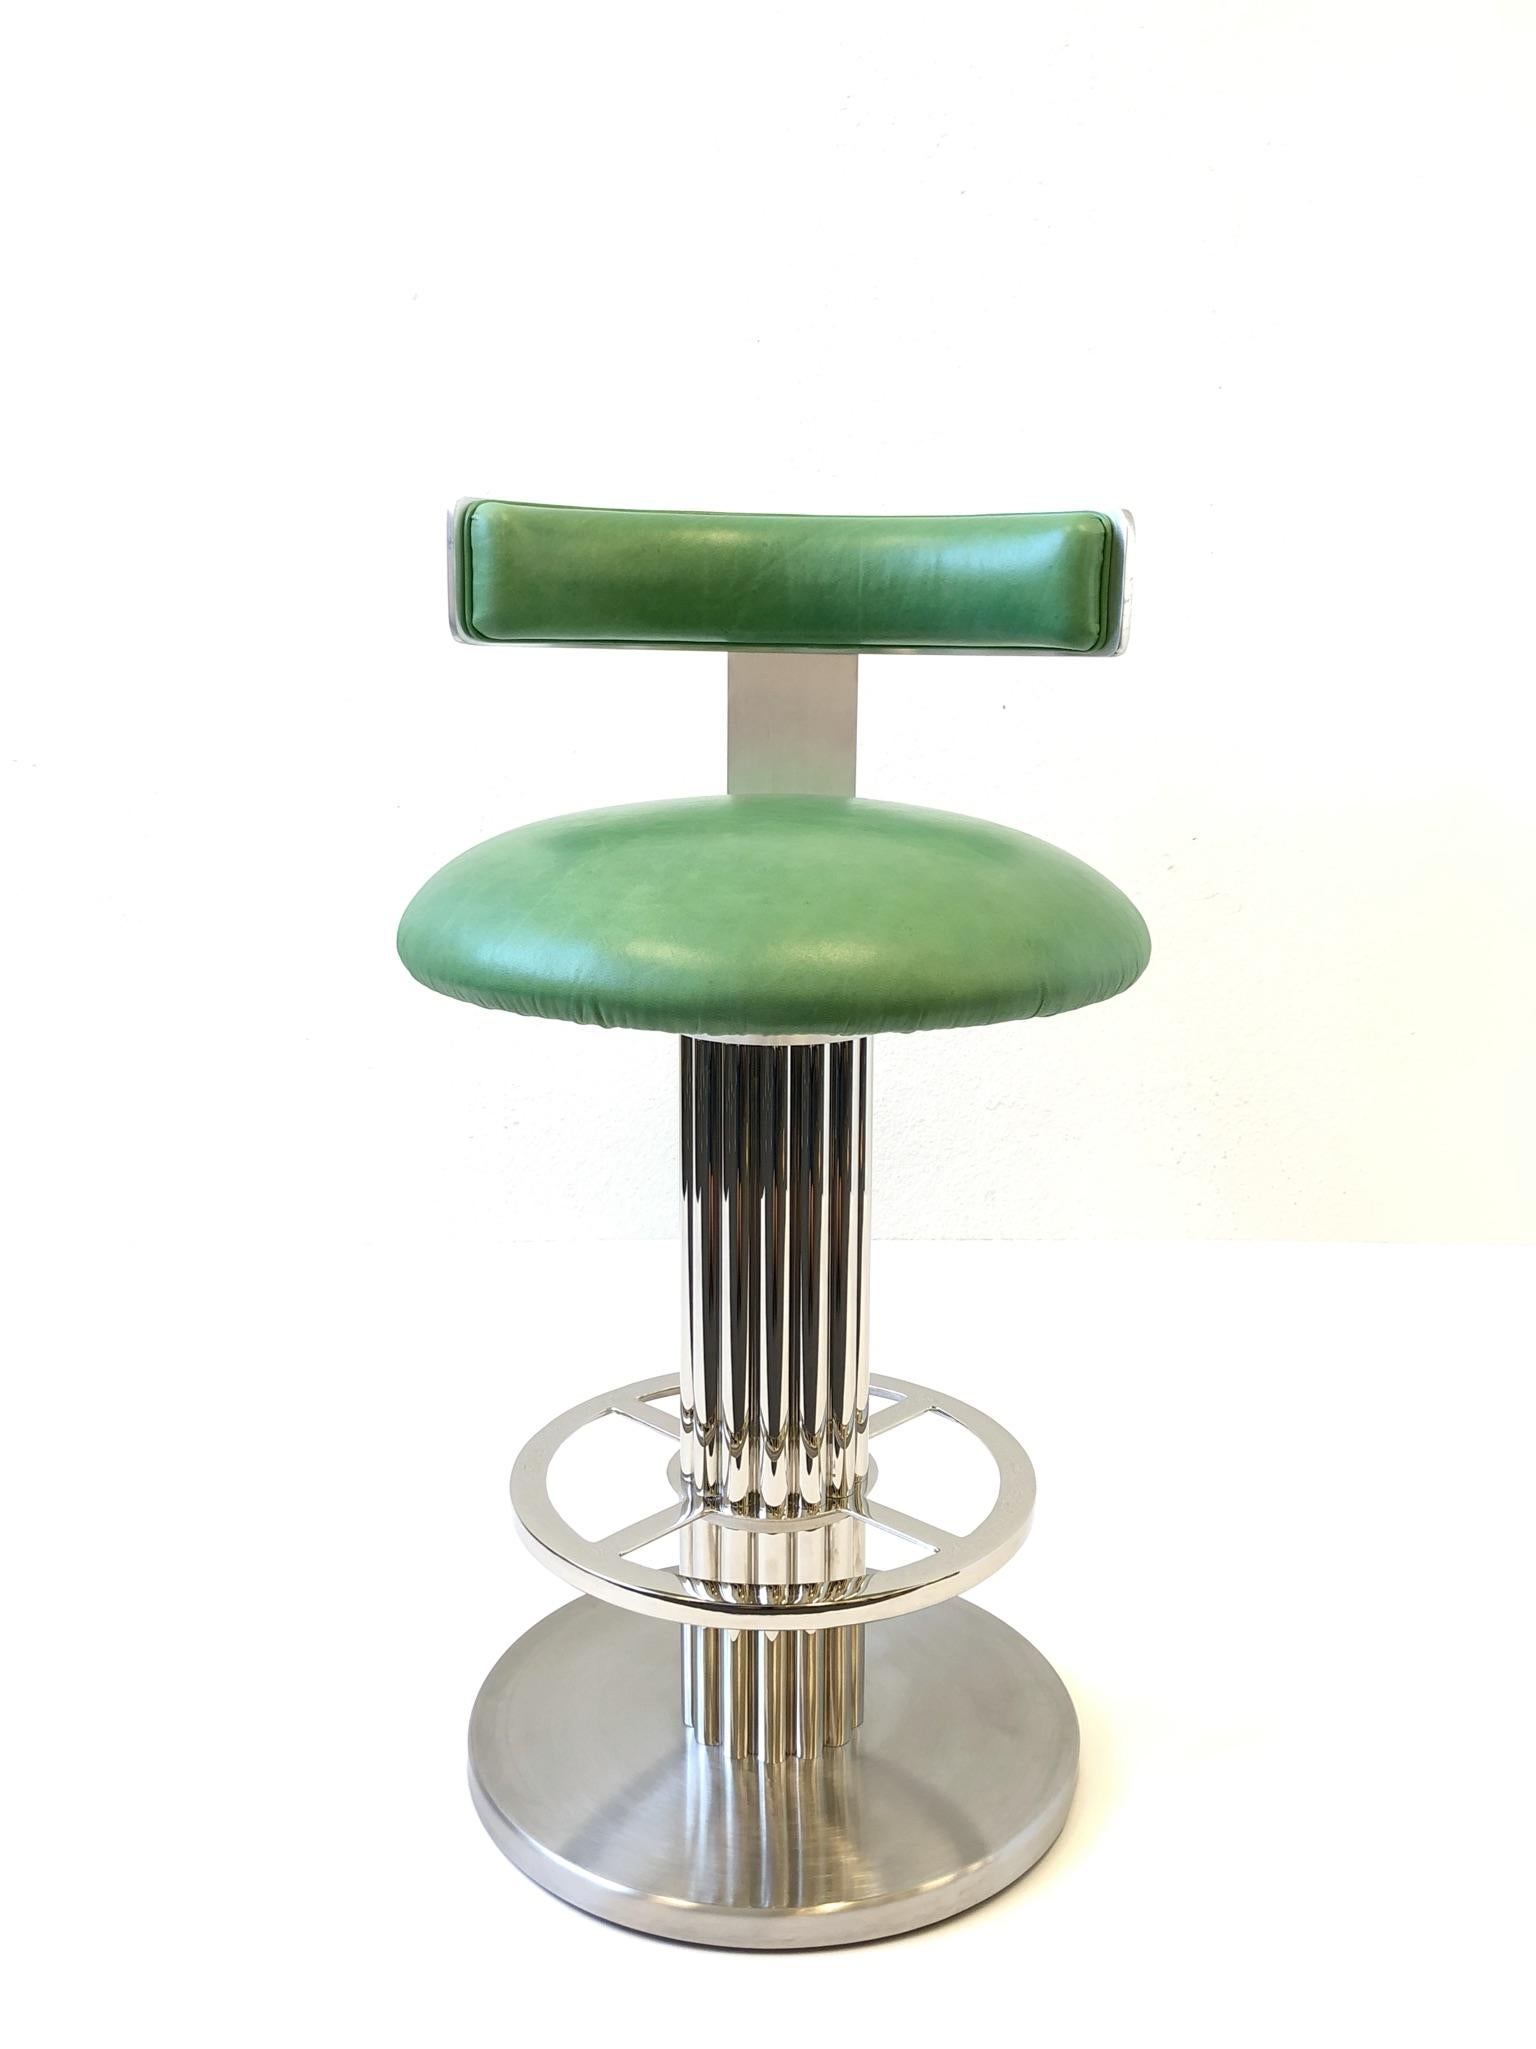 Late 20th Century Set of Four Chrome and Leather Swivel Barstools by Design for Leisure Ltd